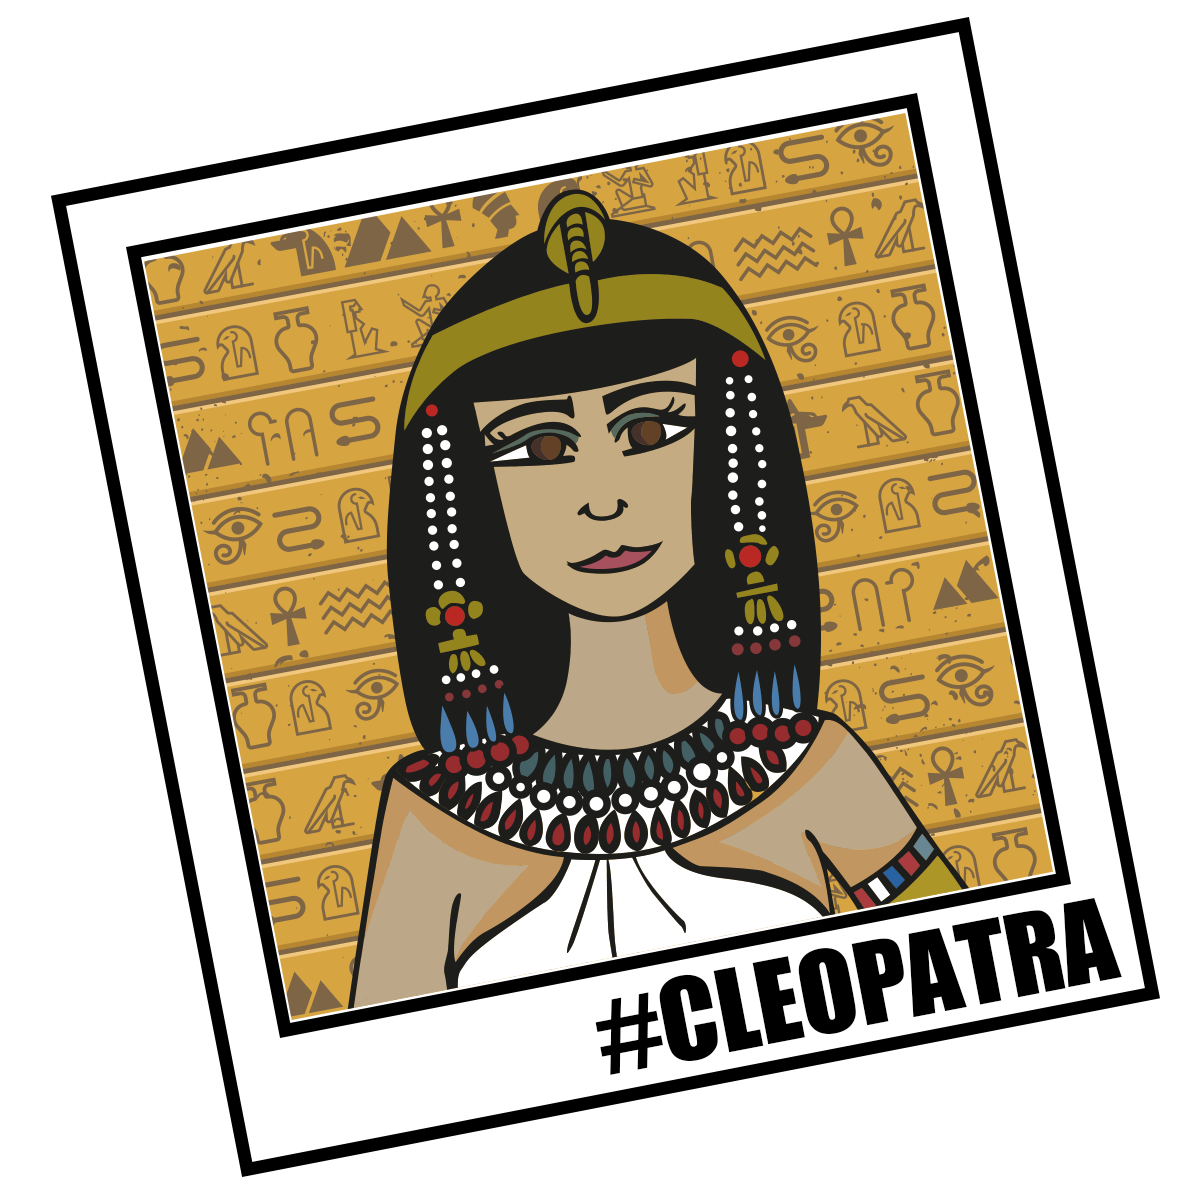 Cleopatra: The Enigmatic Strategist